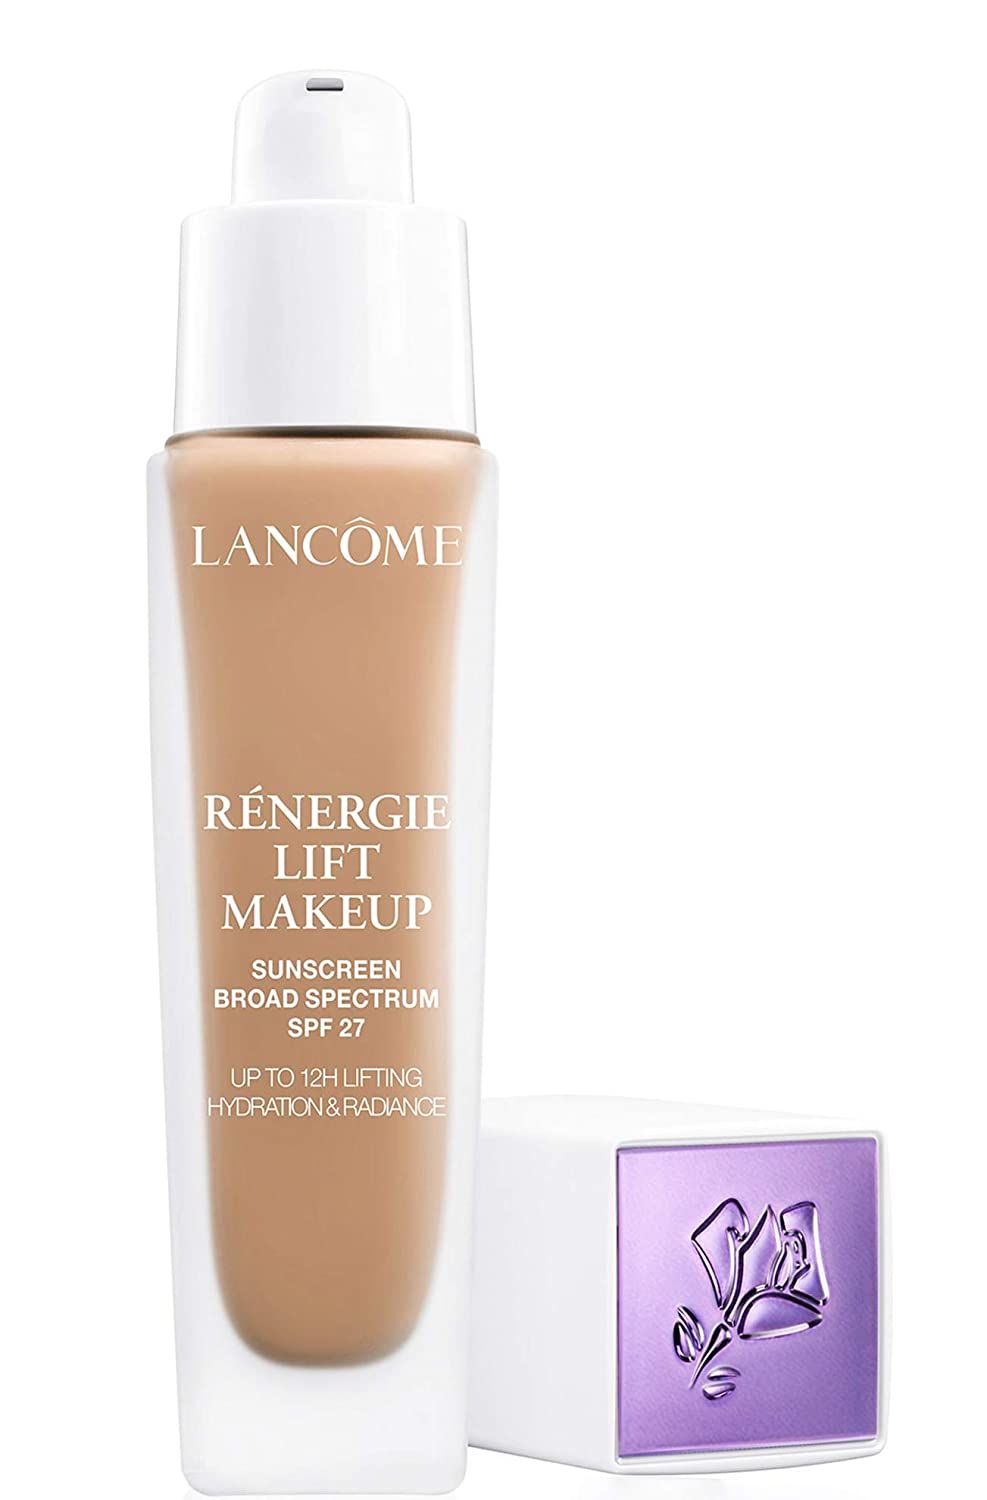 Lancome Renergie Lift Makeup Broad Spectrum Foundation for aging skin